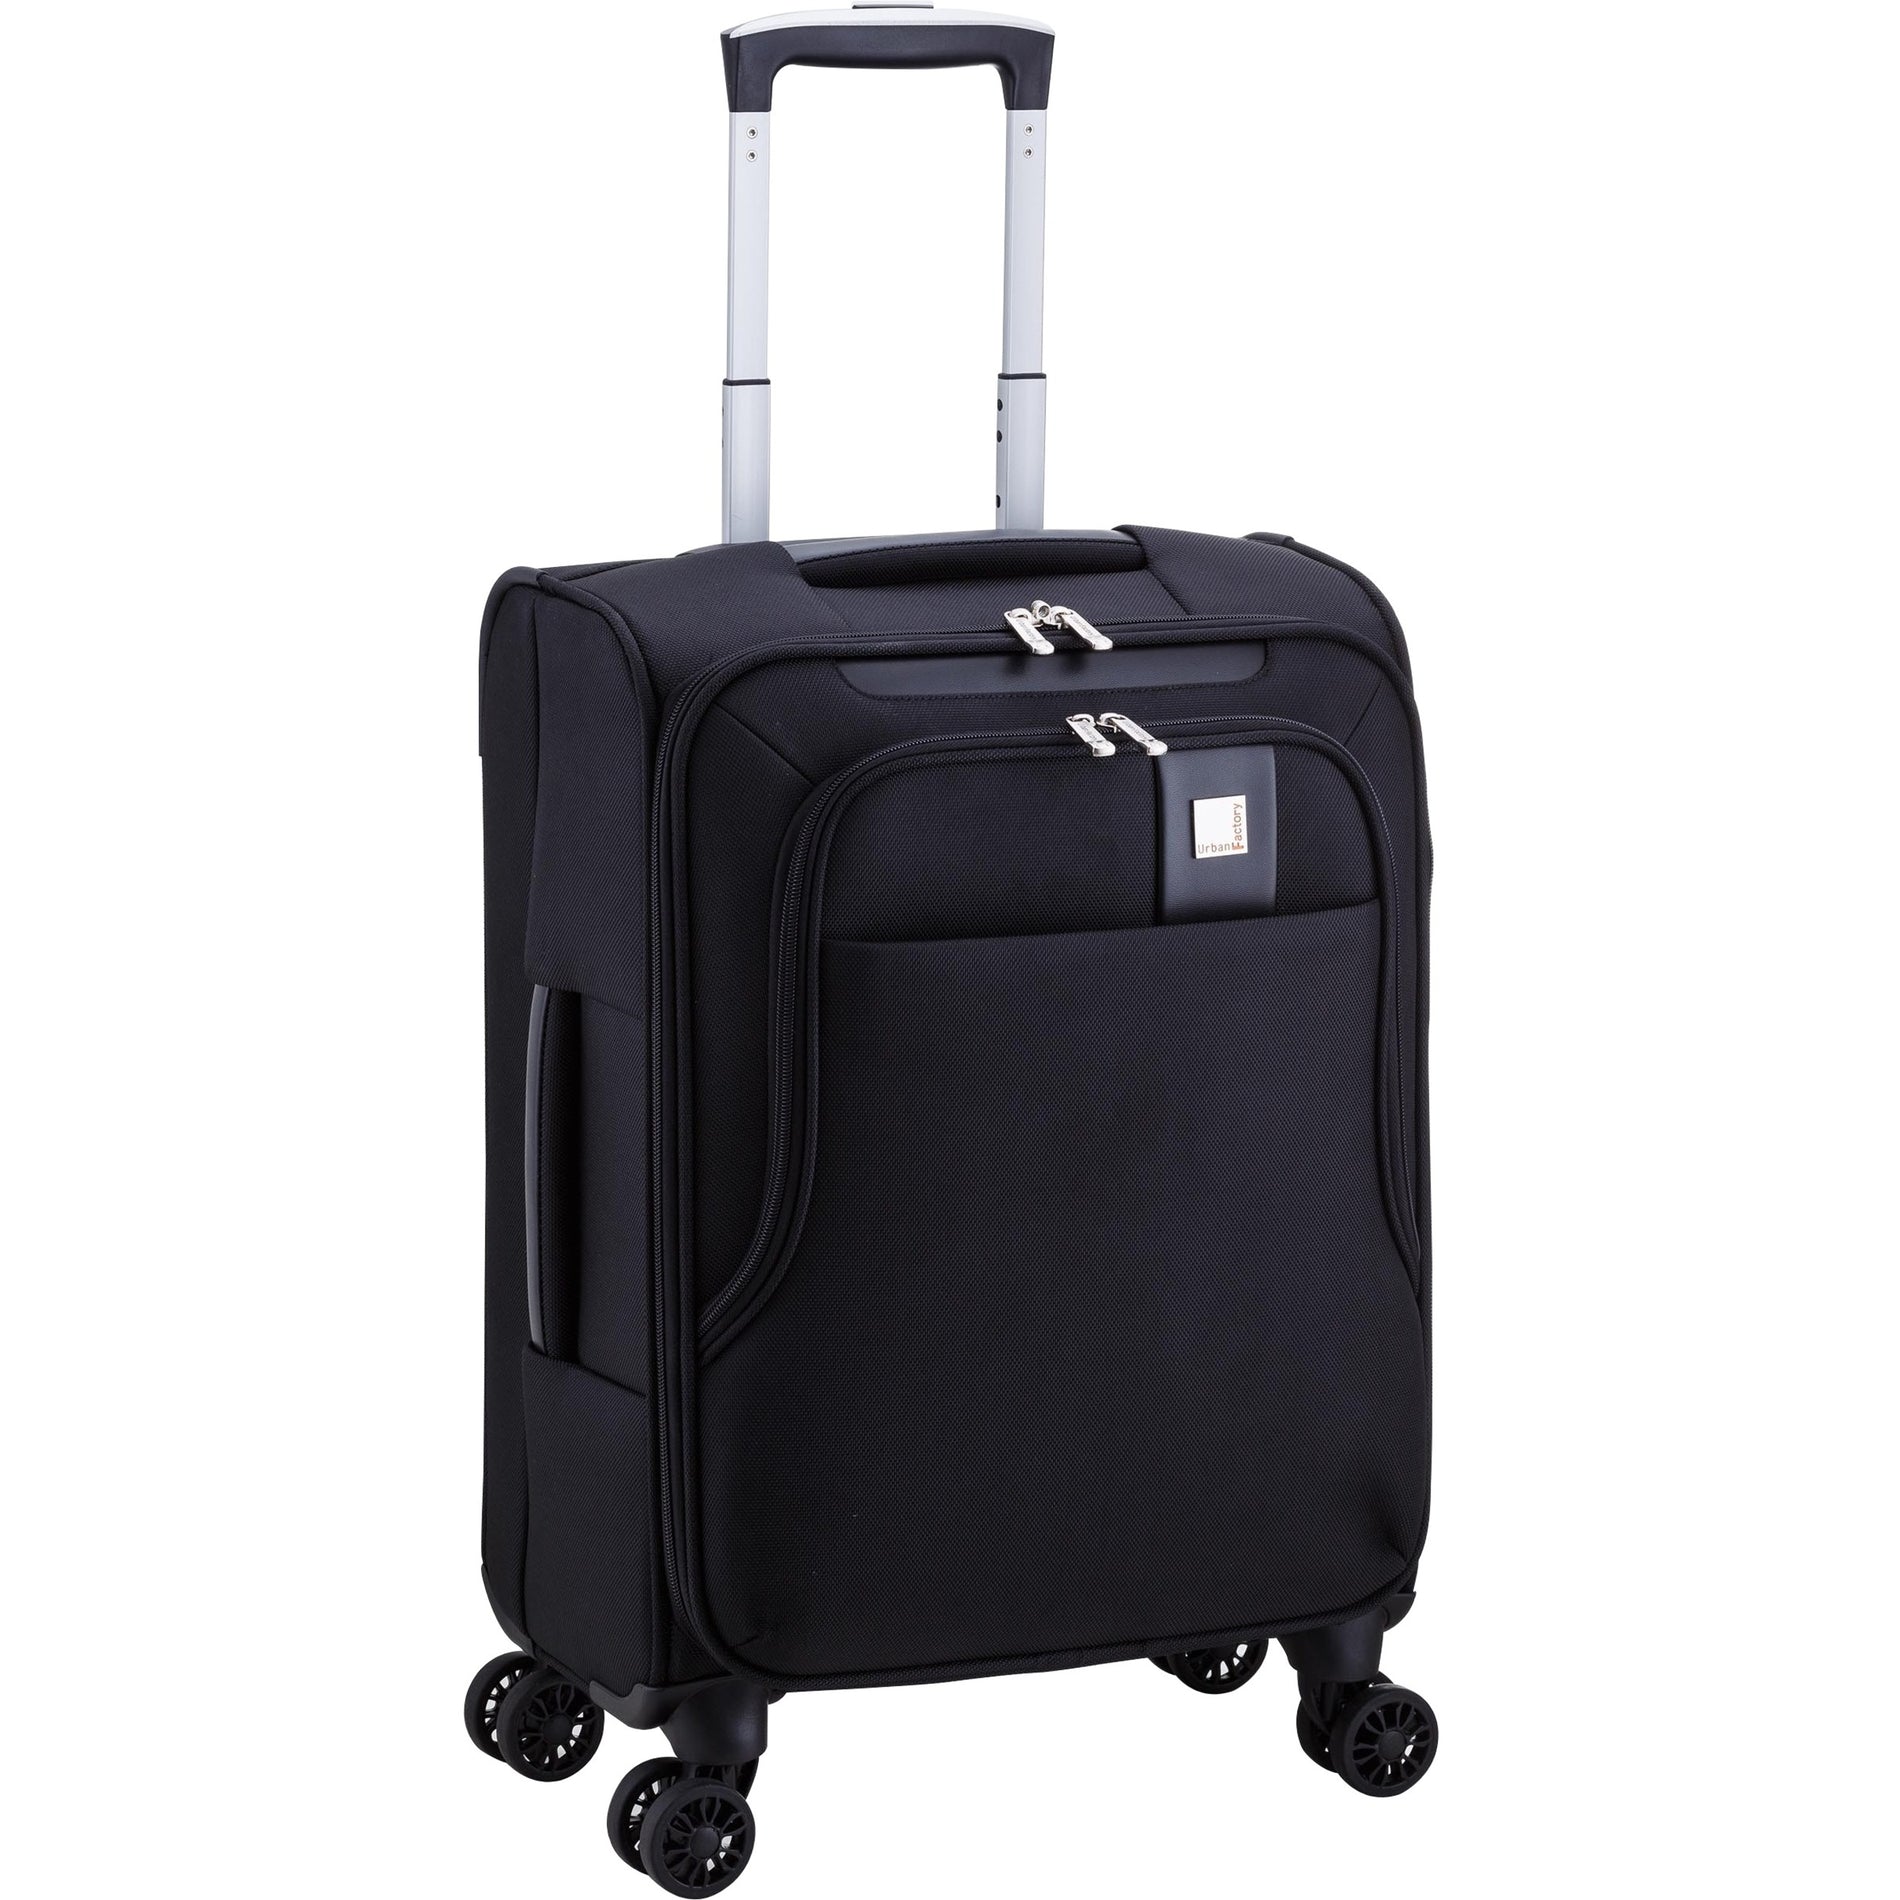 Urban Factory CTT01UF-V3 City Travel Trolley 15.6" Carrying Case, Accessories, Notebook, Travel Essential